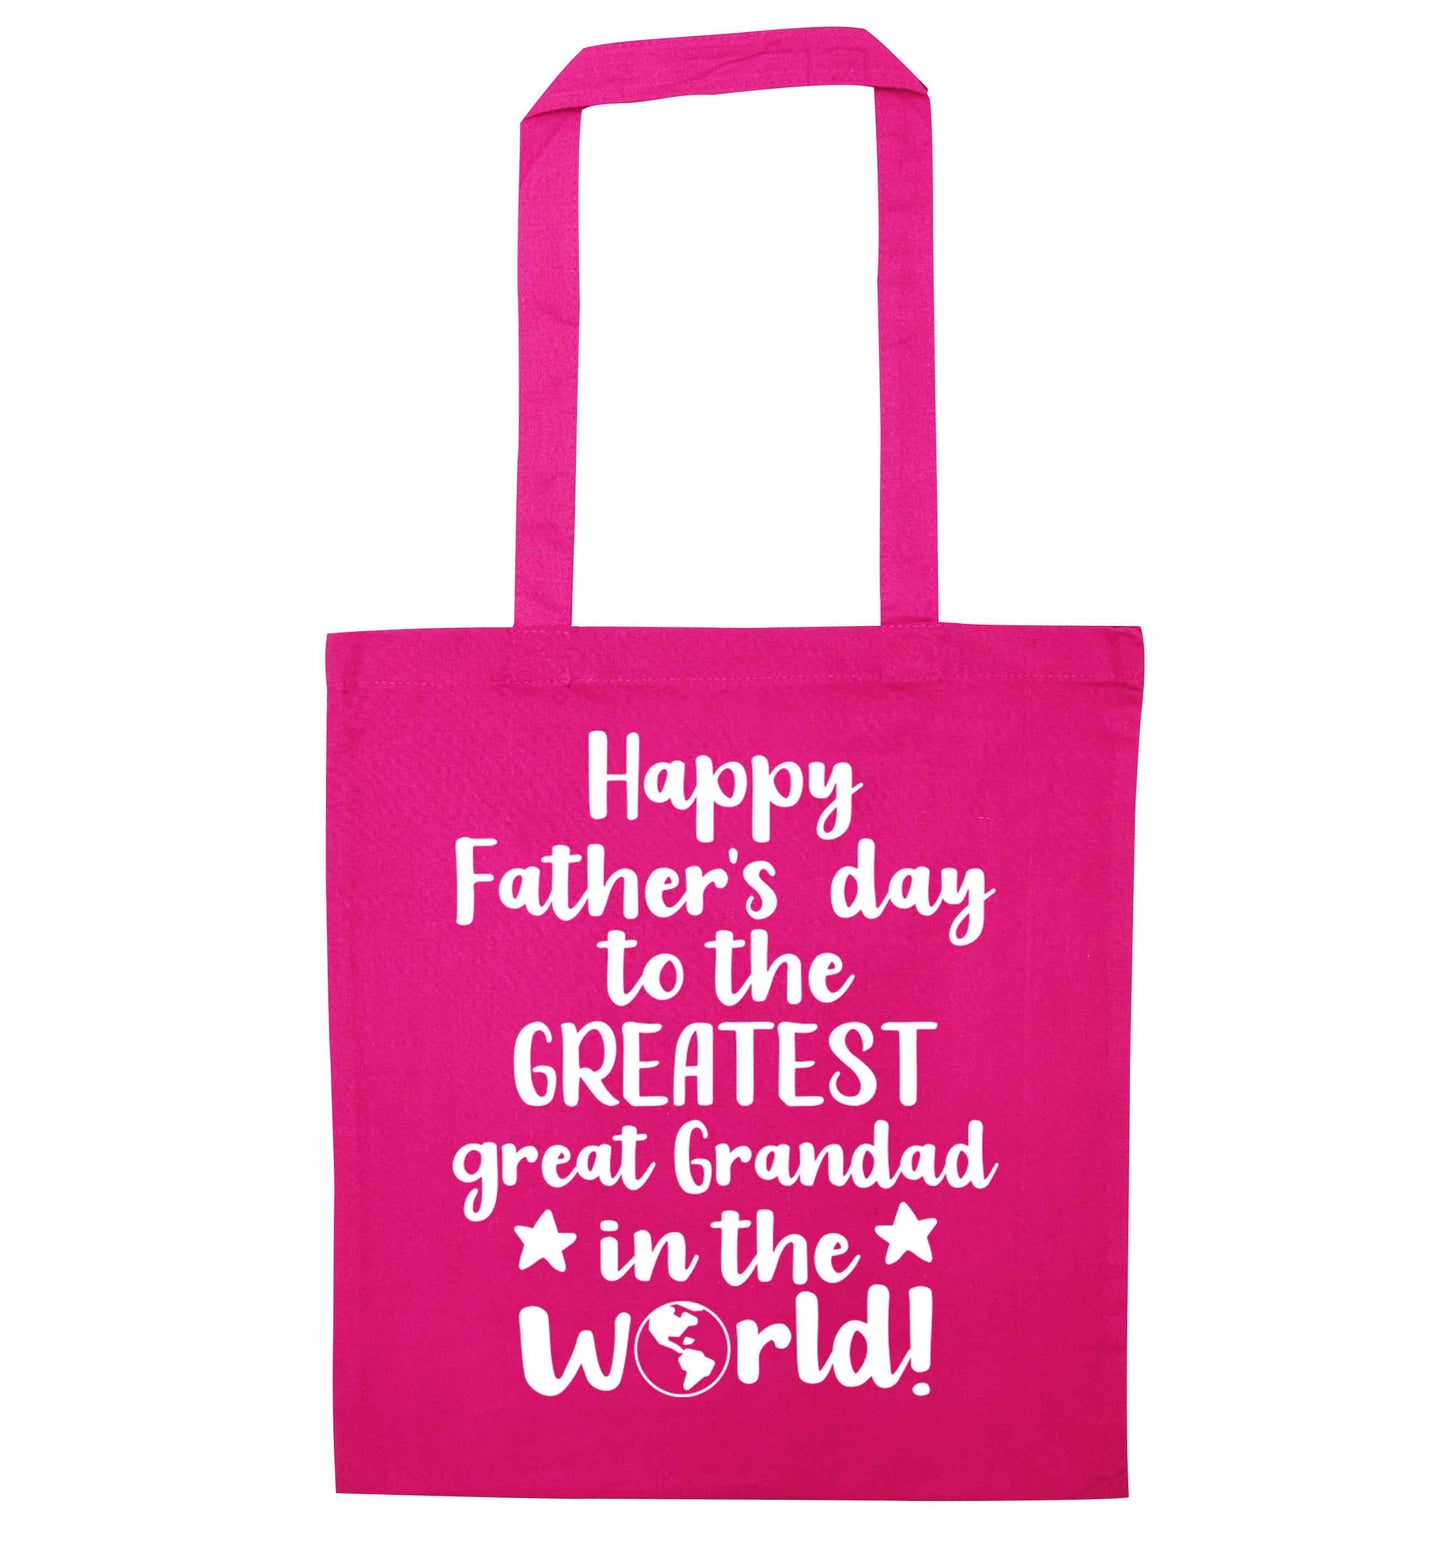 Happy Father's day to the greatest great grandad in the world pink tote bag